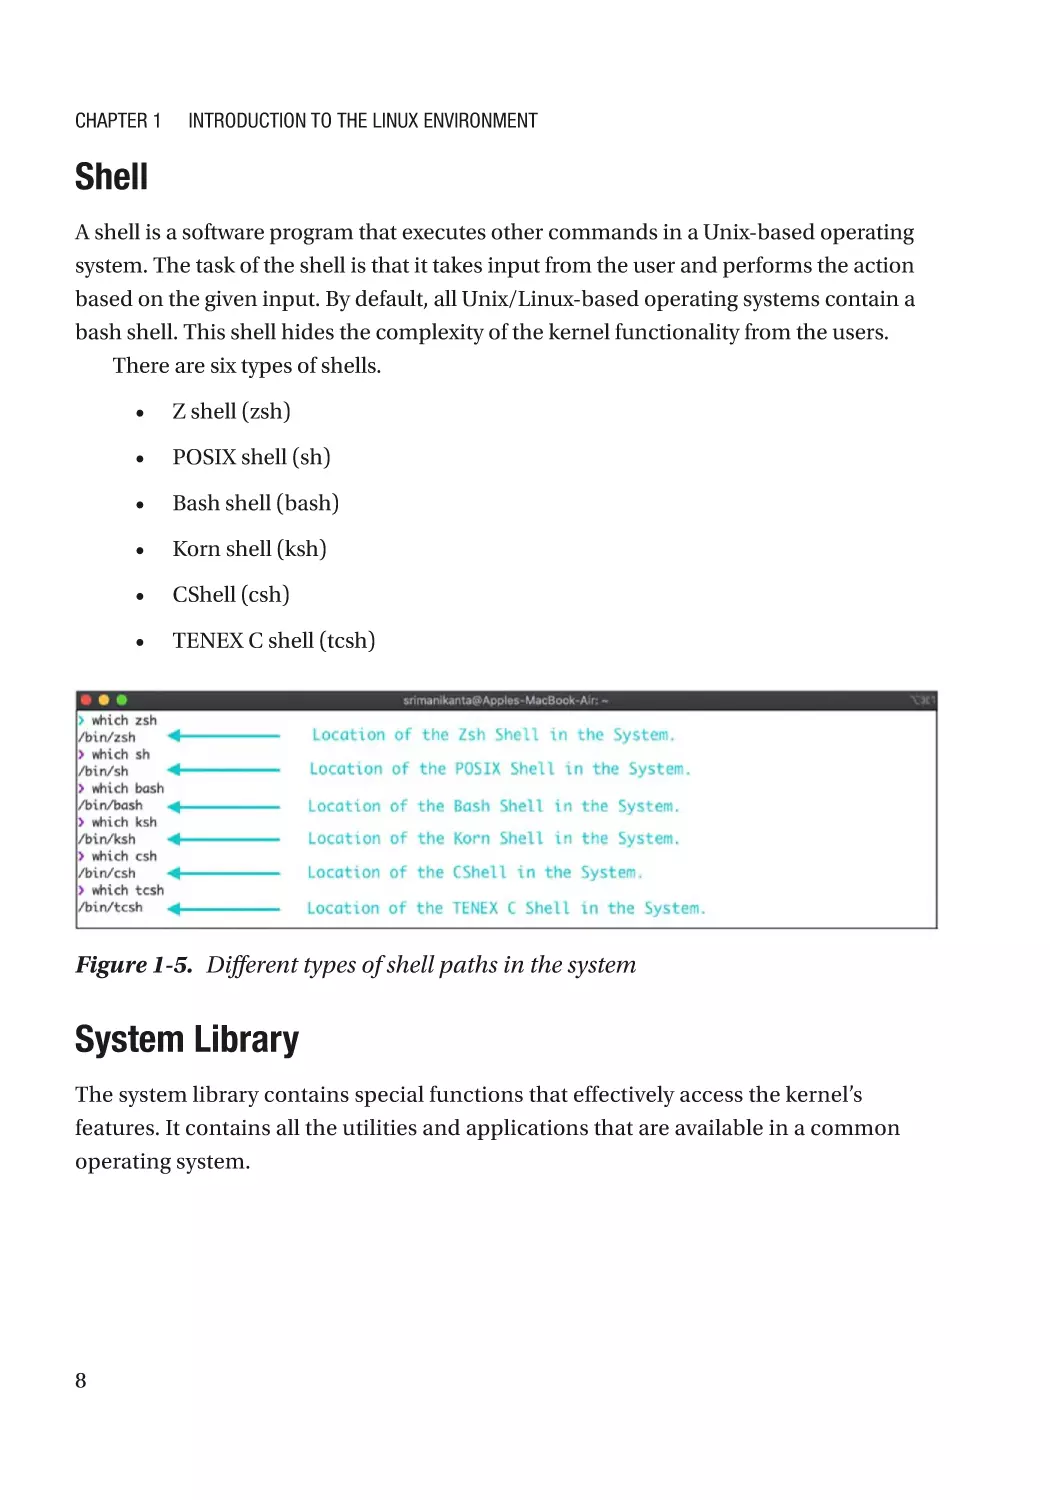 Shell
System Library